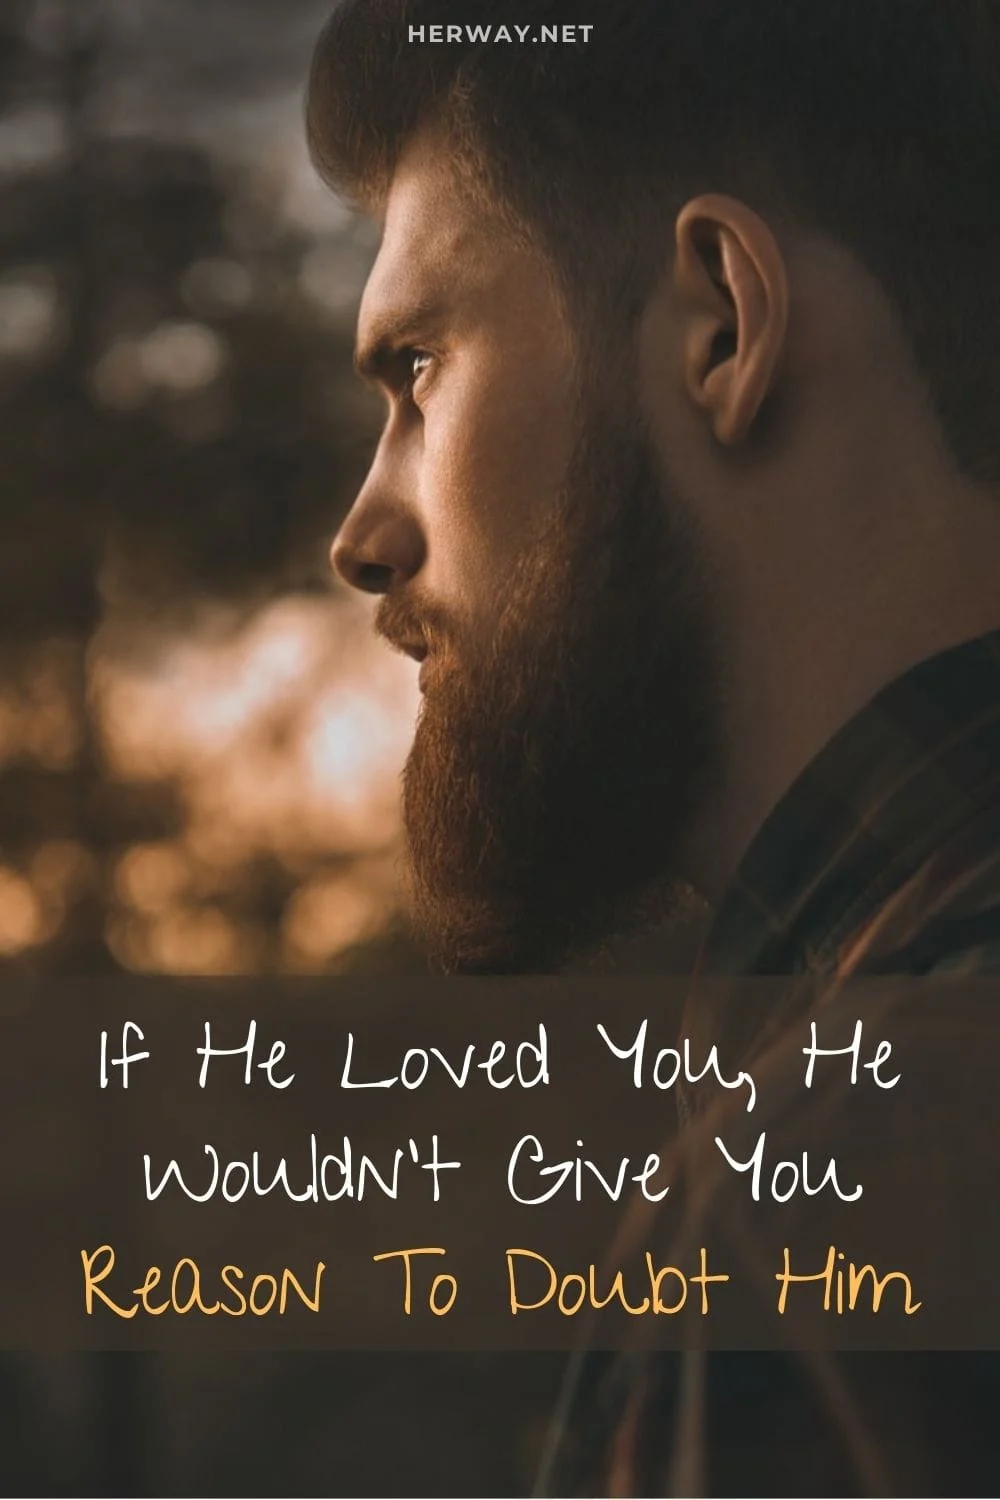 If He Loved You, He Wouldn’t Give You Reason To Doubt Him